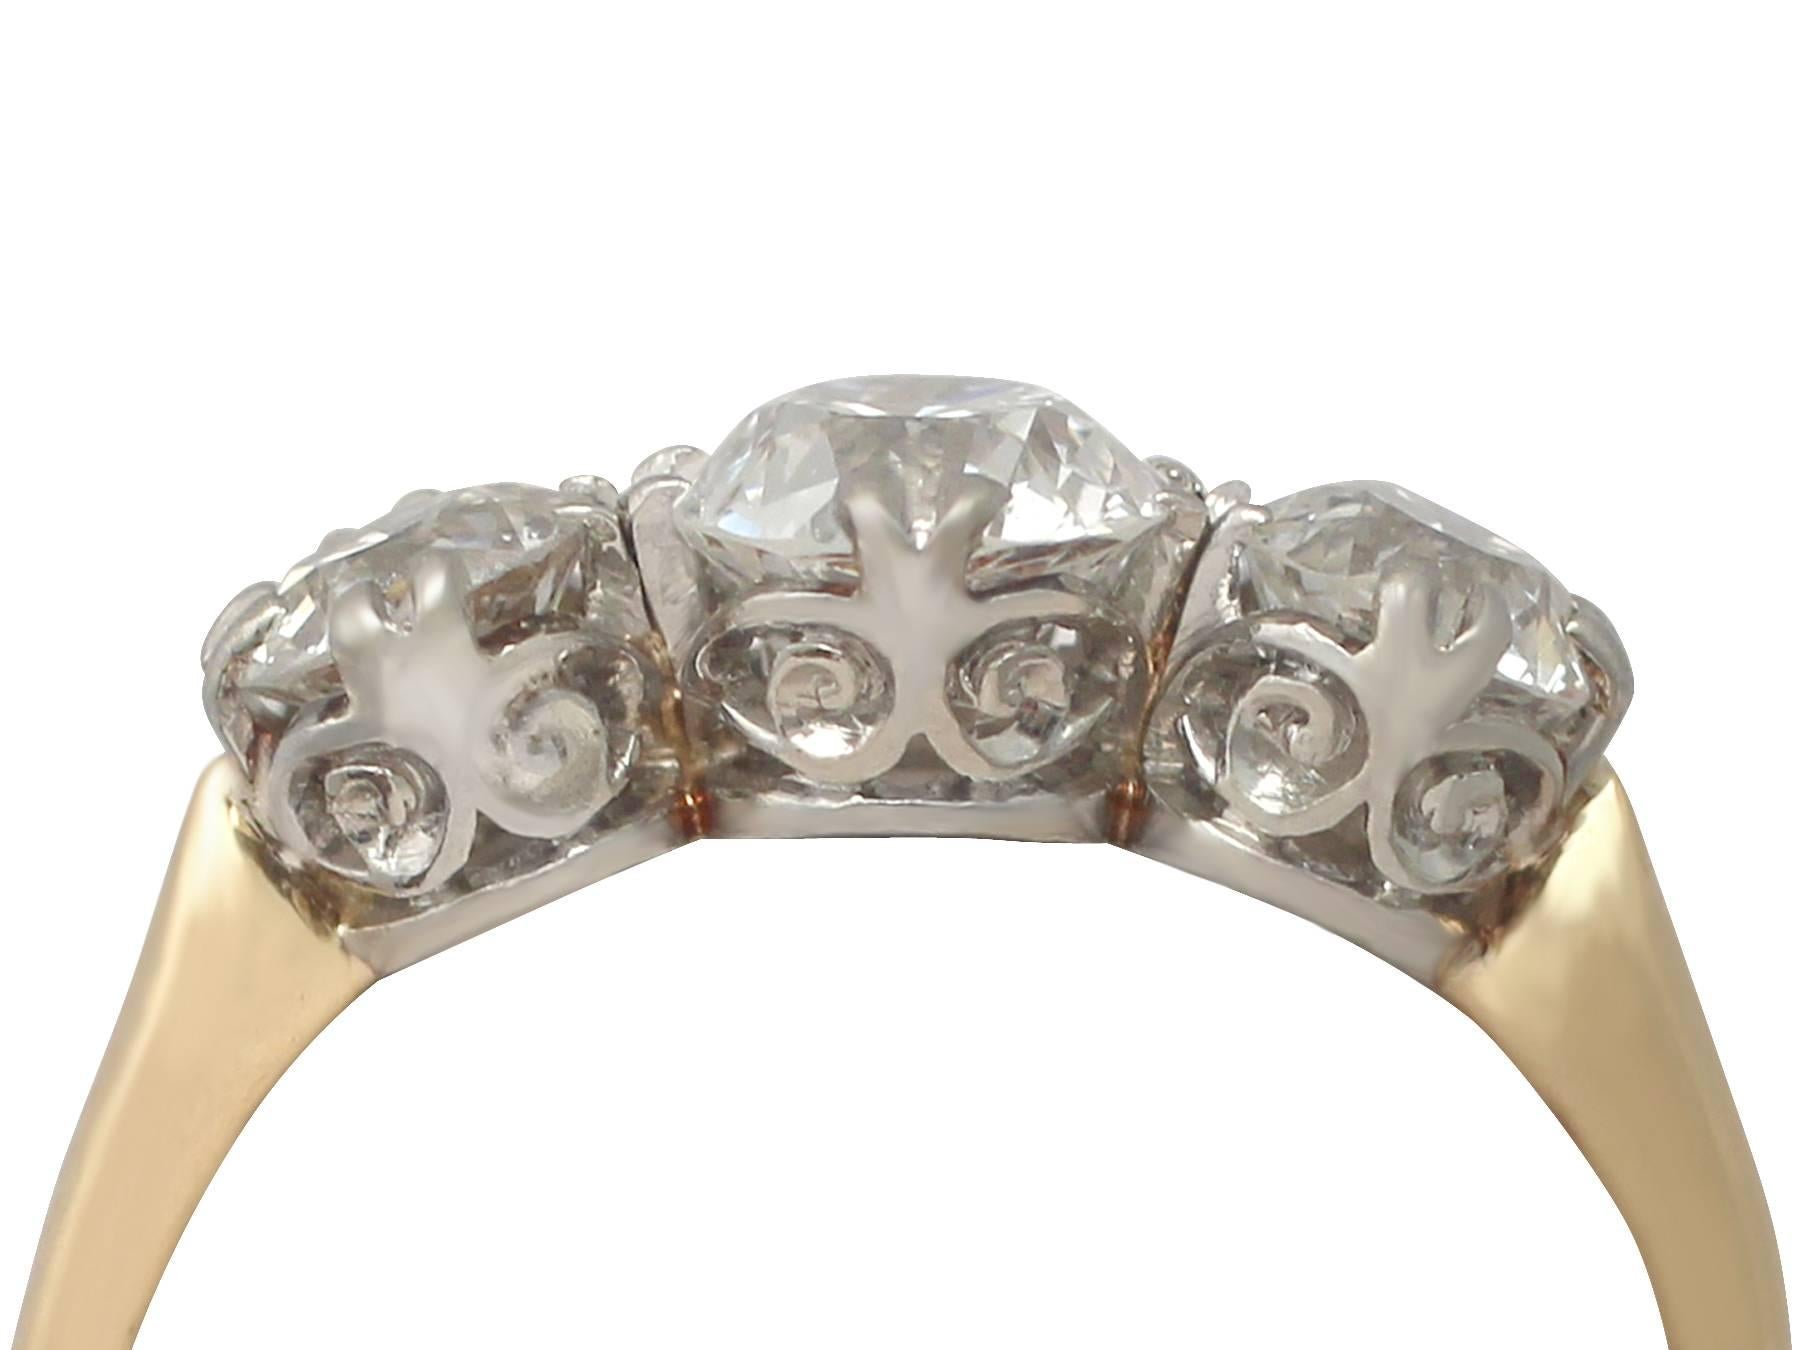 A fine and impressive vintage 1.74 carat diamond (total), 18 karat yellow gold, 18 karat white gold set trilogy ring; part of our diverse antique jewelry and estate jewelry collections

This fine and impressive vintage diamond trilogy ring has